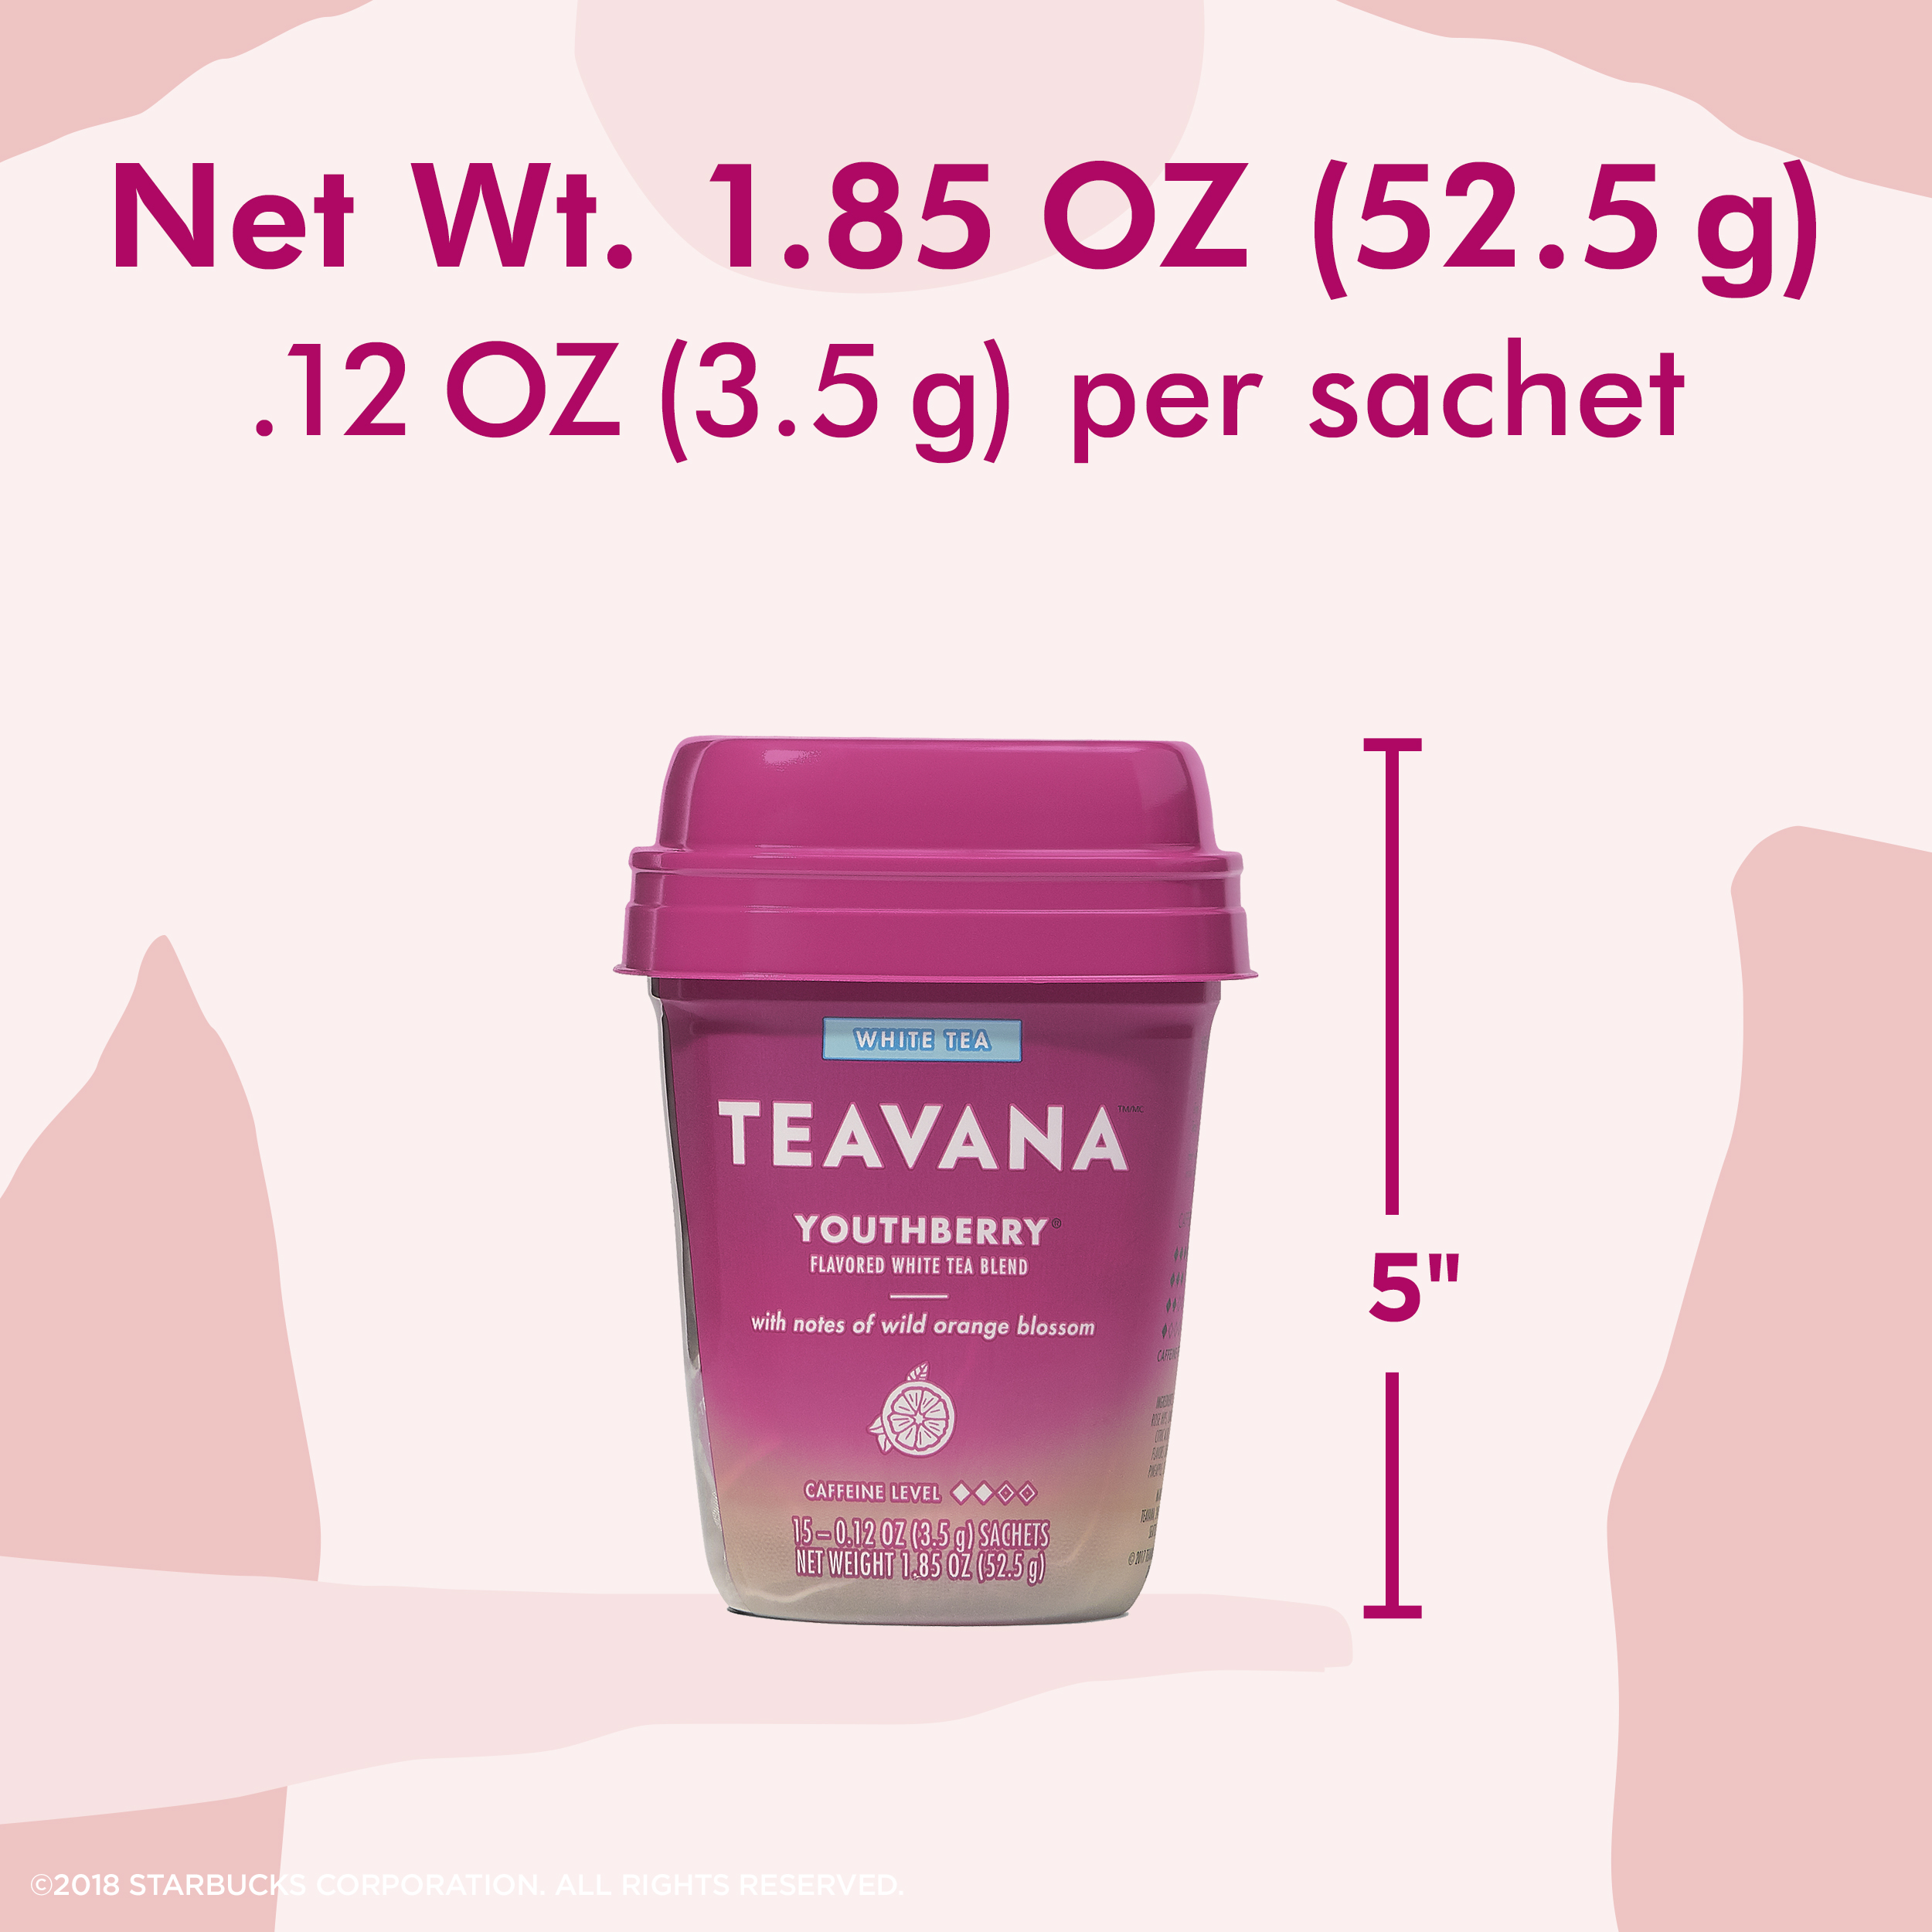 Teavana Youthberry, White Tea With Notes of Wild Orange Blossom, 15 Sachets - image 6 of 6